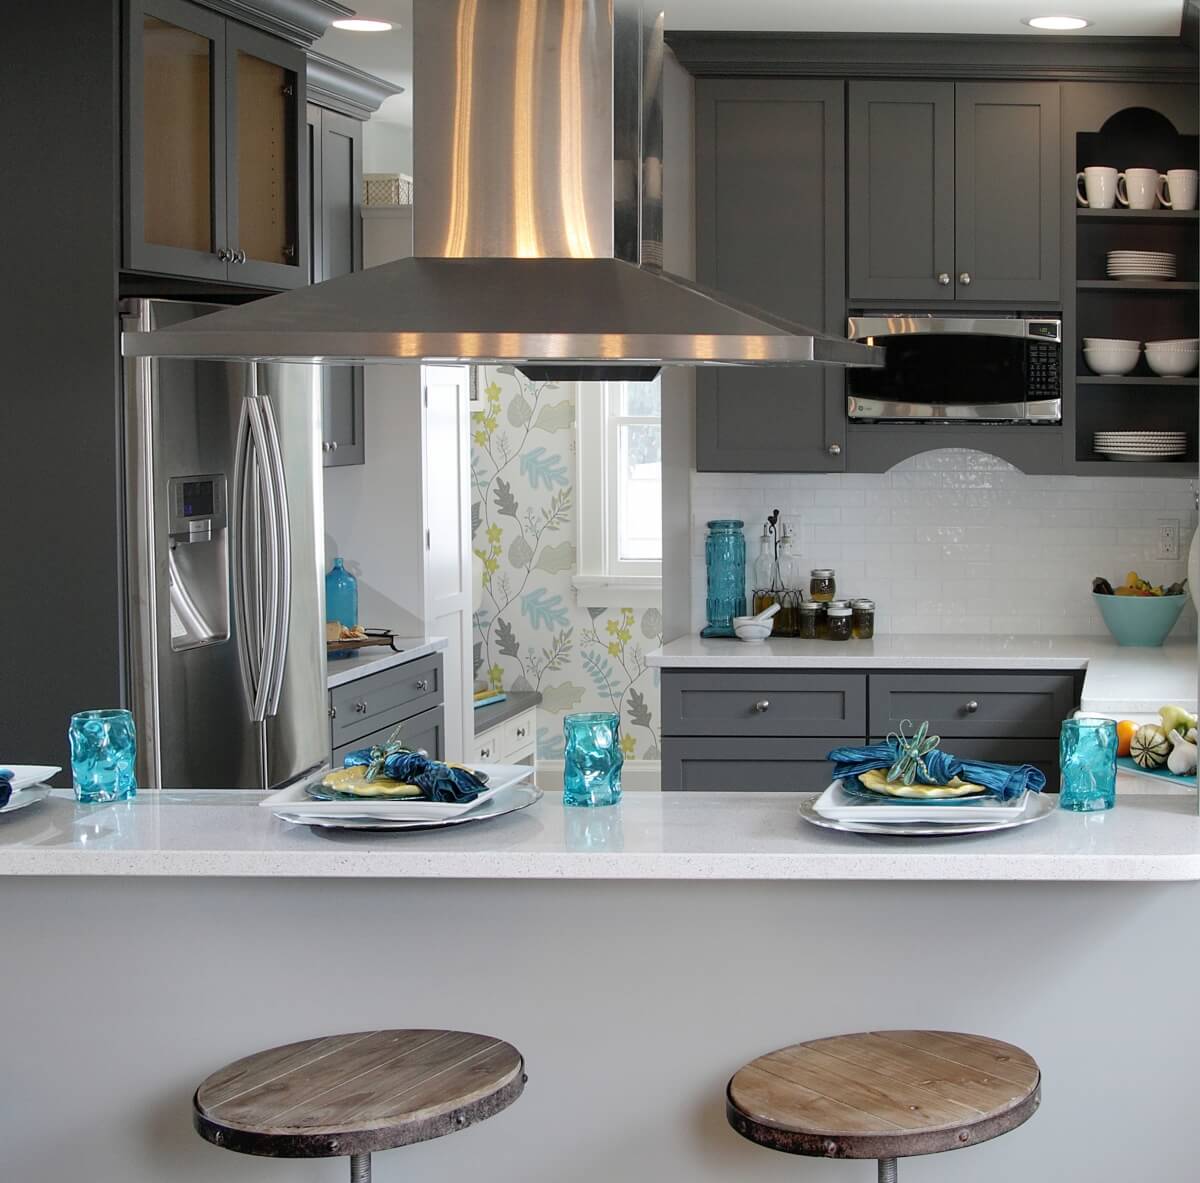 A dark gray painted kitchen with bold blue accents and brightly colored wallpaper.